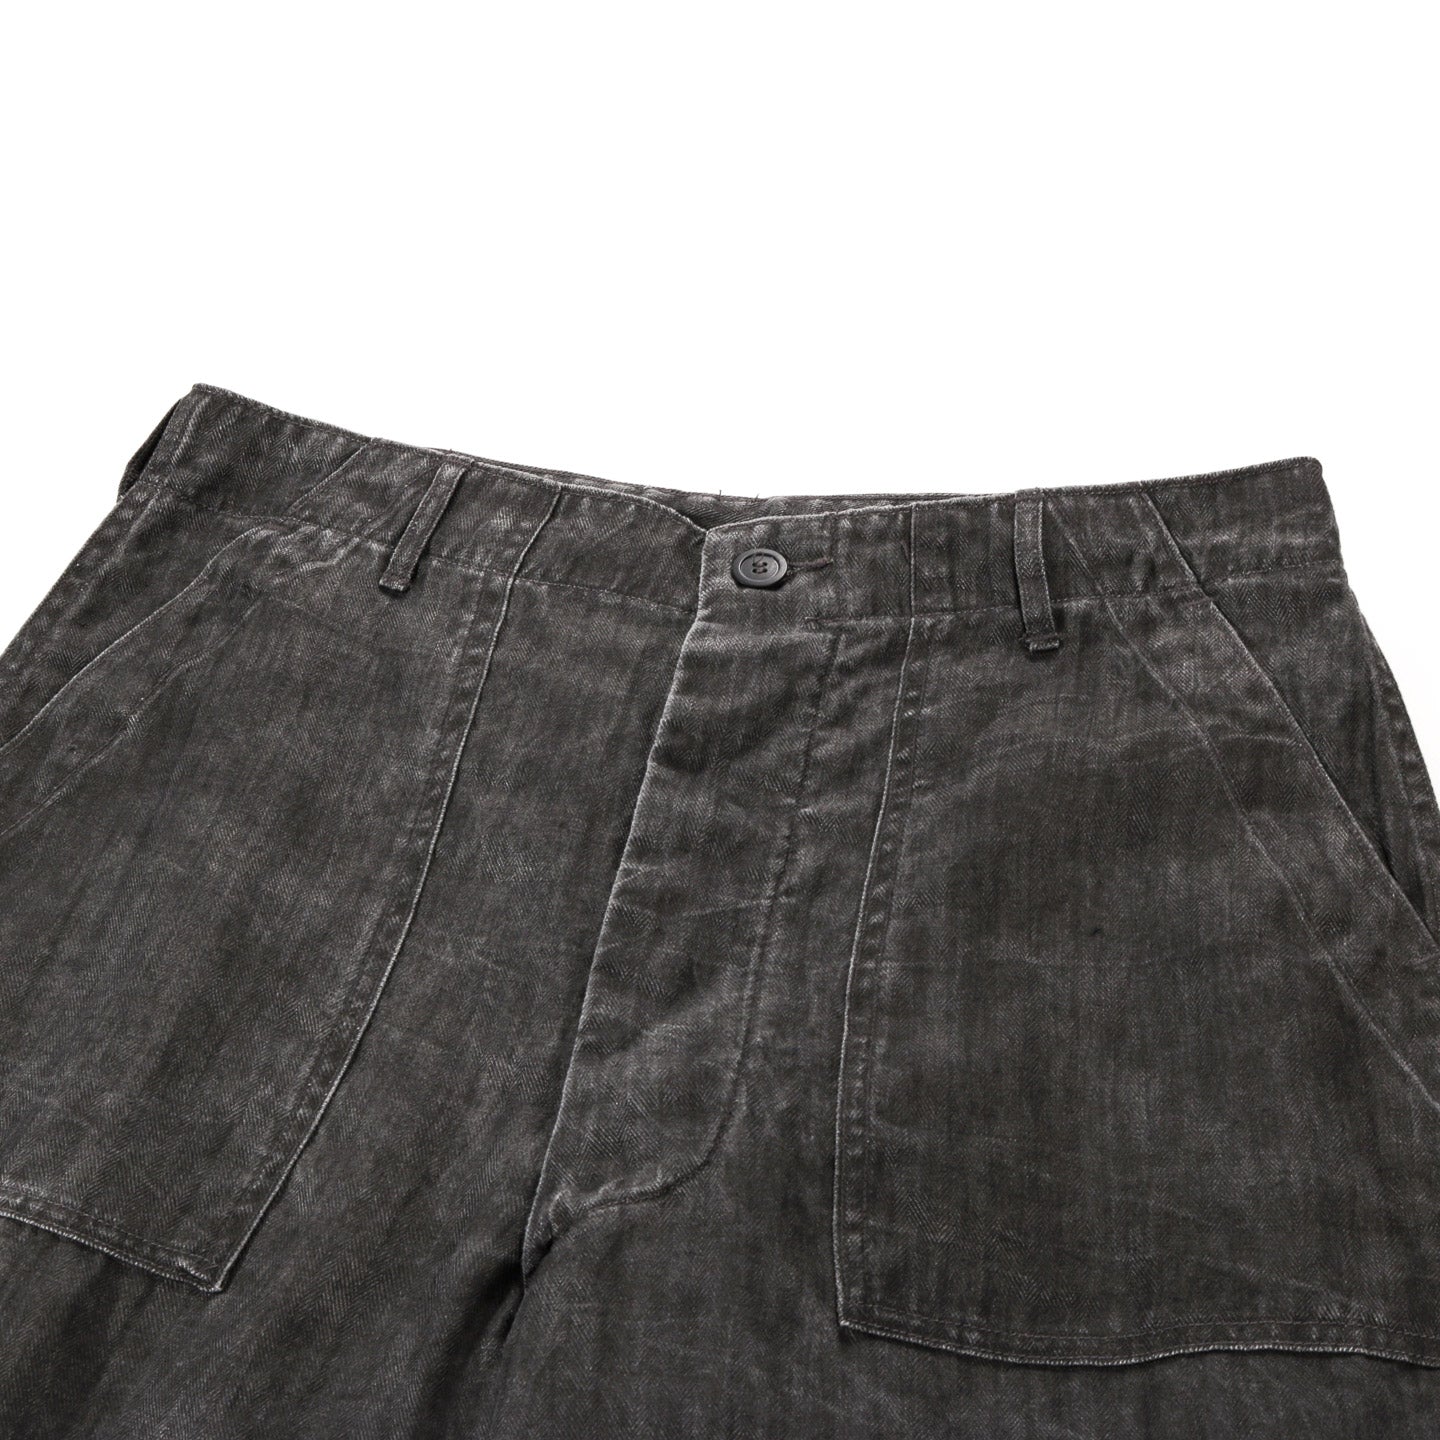 ORSLOW SUMI DYED LINEN SUMMER FATIGUE PANTS CHARCOAL GRAY